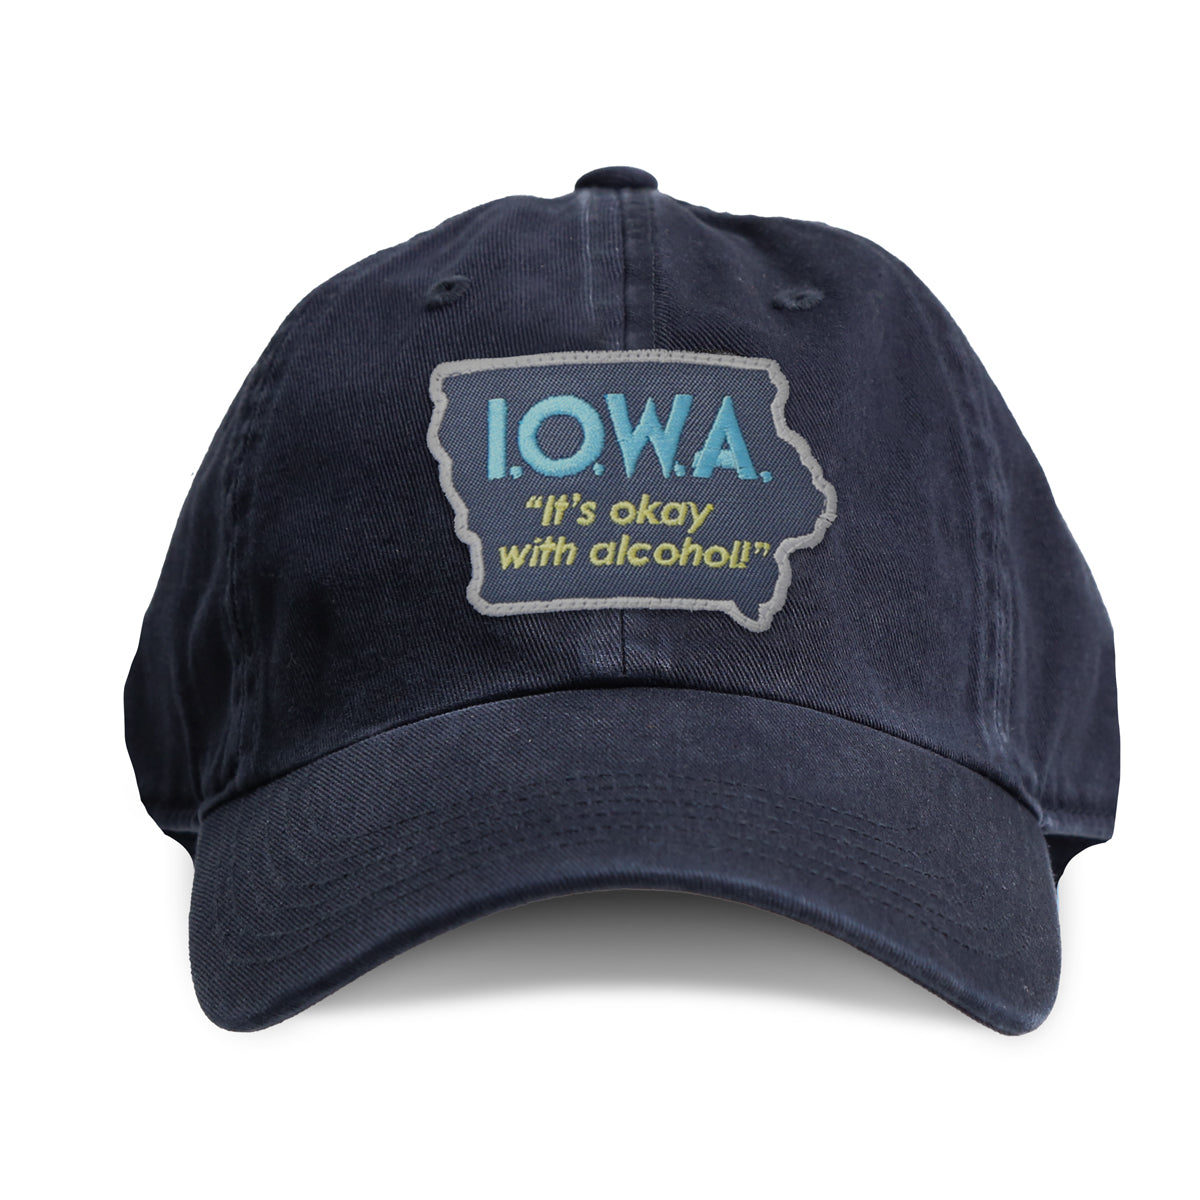 I.O.W.A. It's Okay With Alcohol Dad Hat